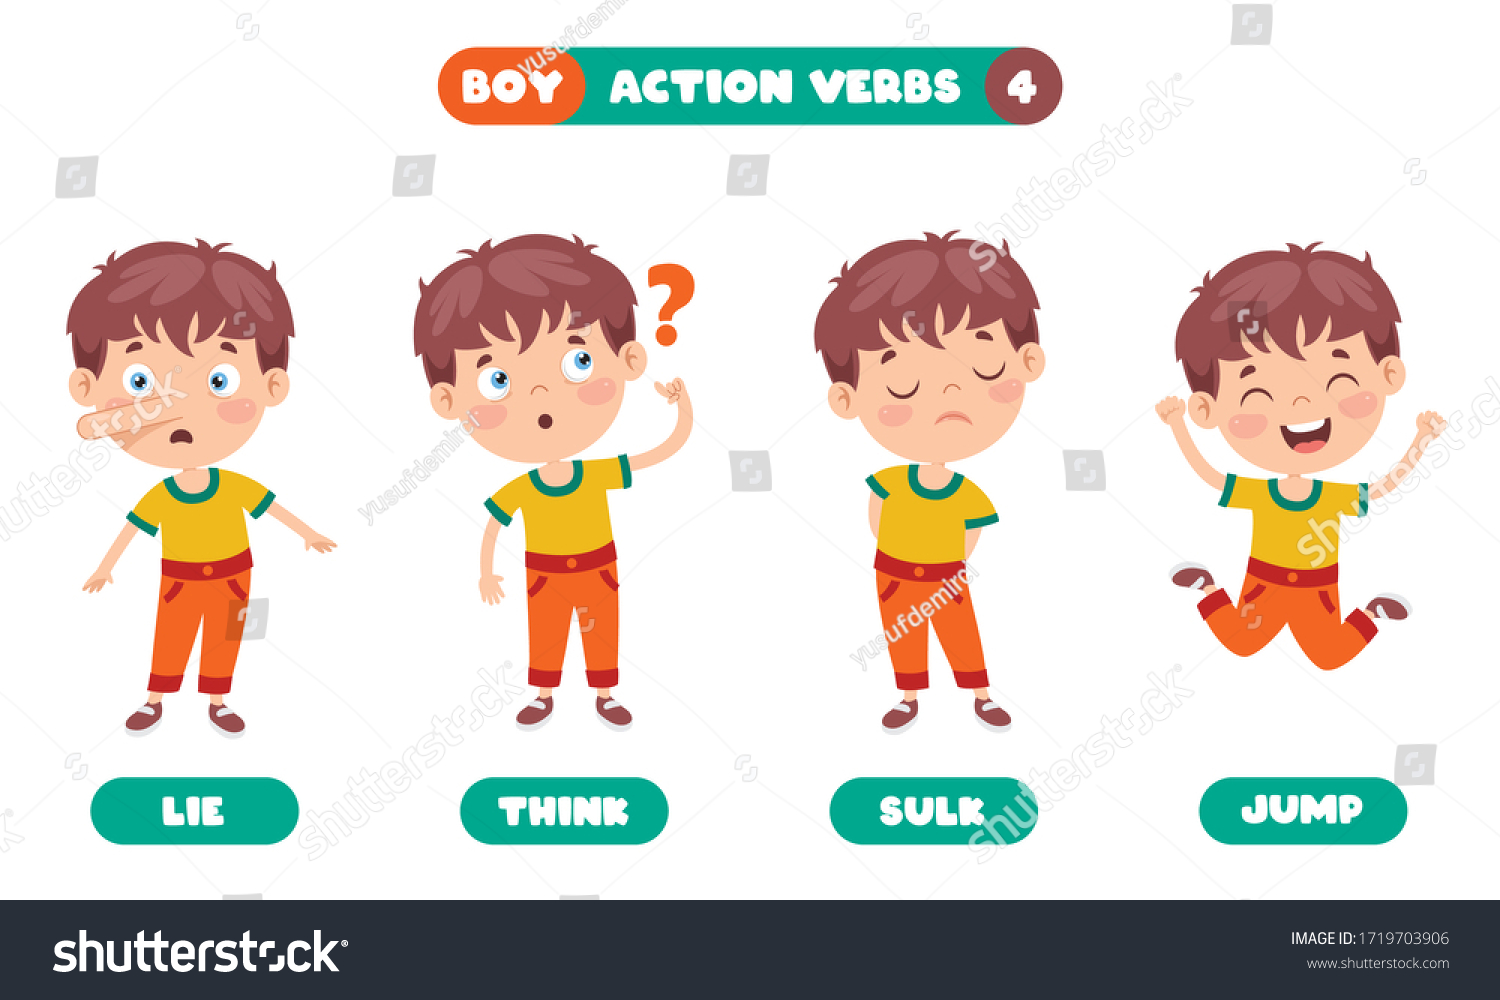 Action Verbs For Class 4